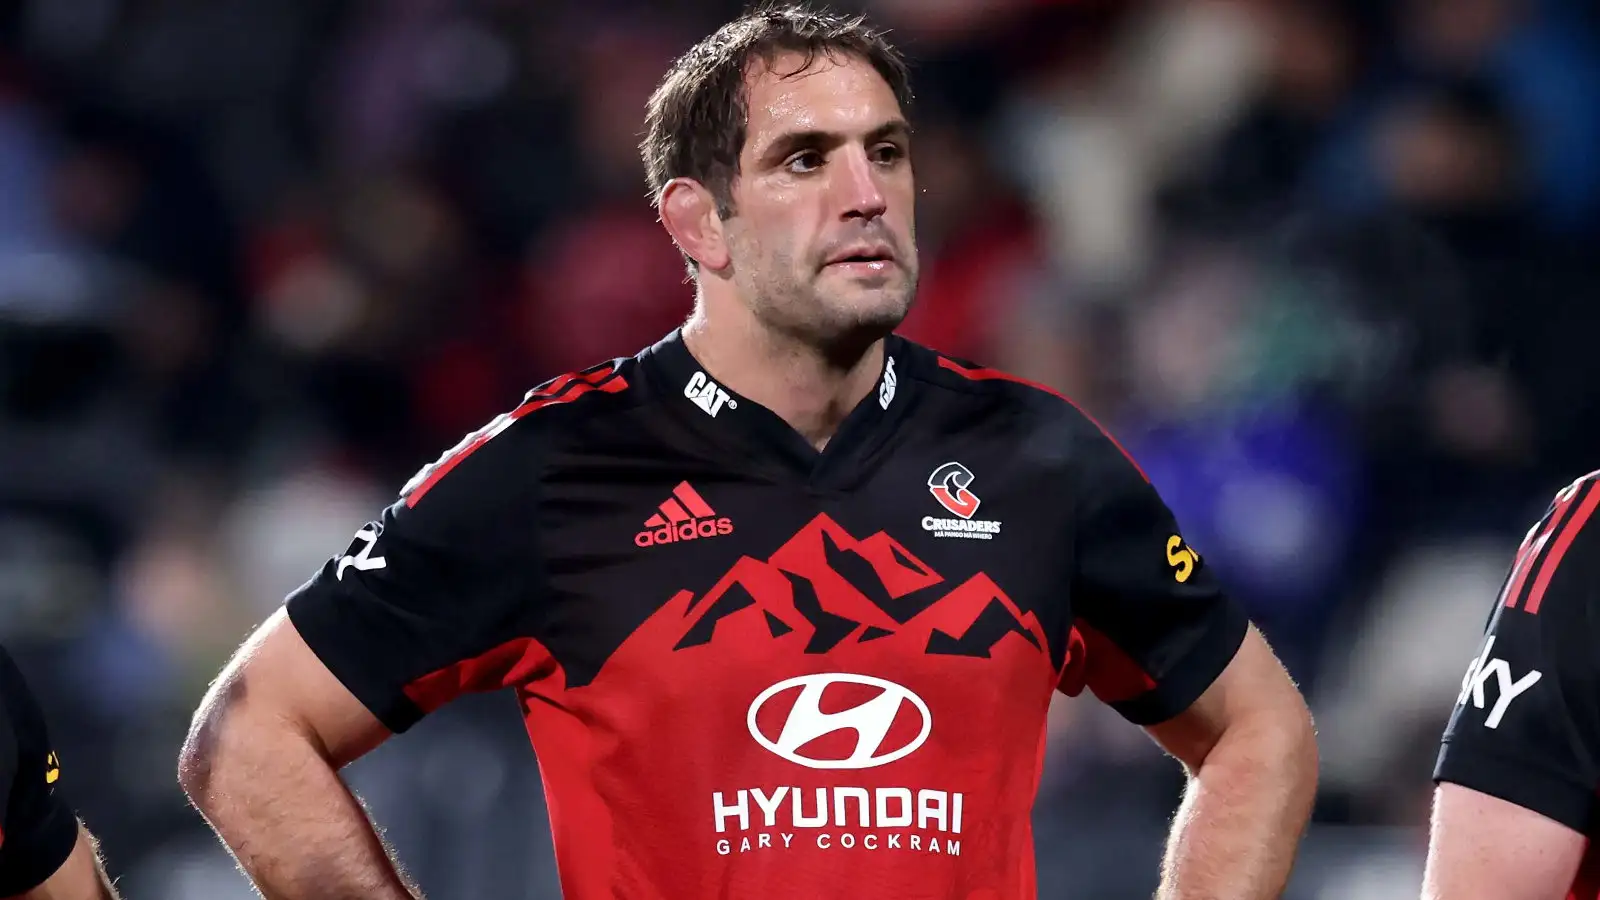 Crusaders boosted as All Black returns to start in Super Rugby